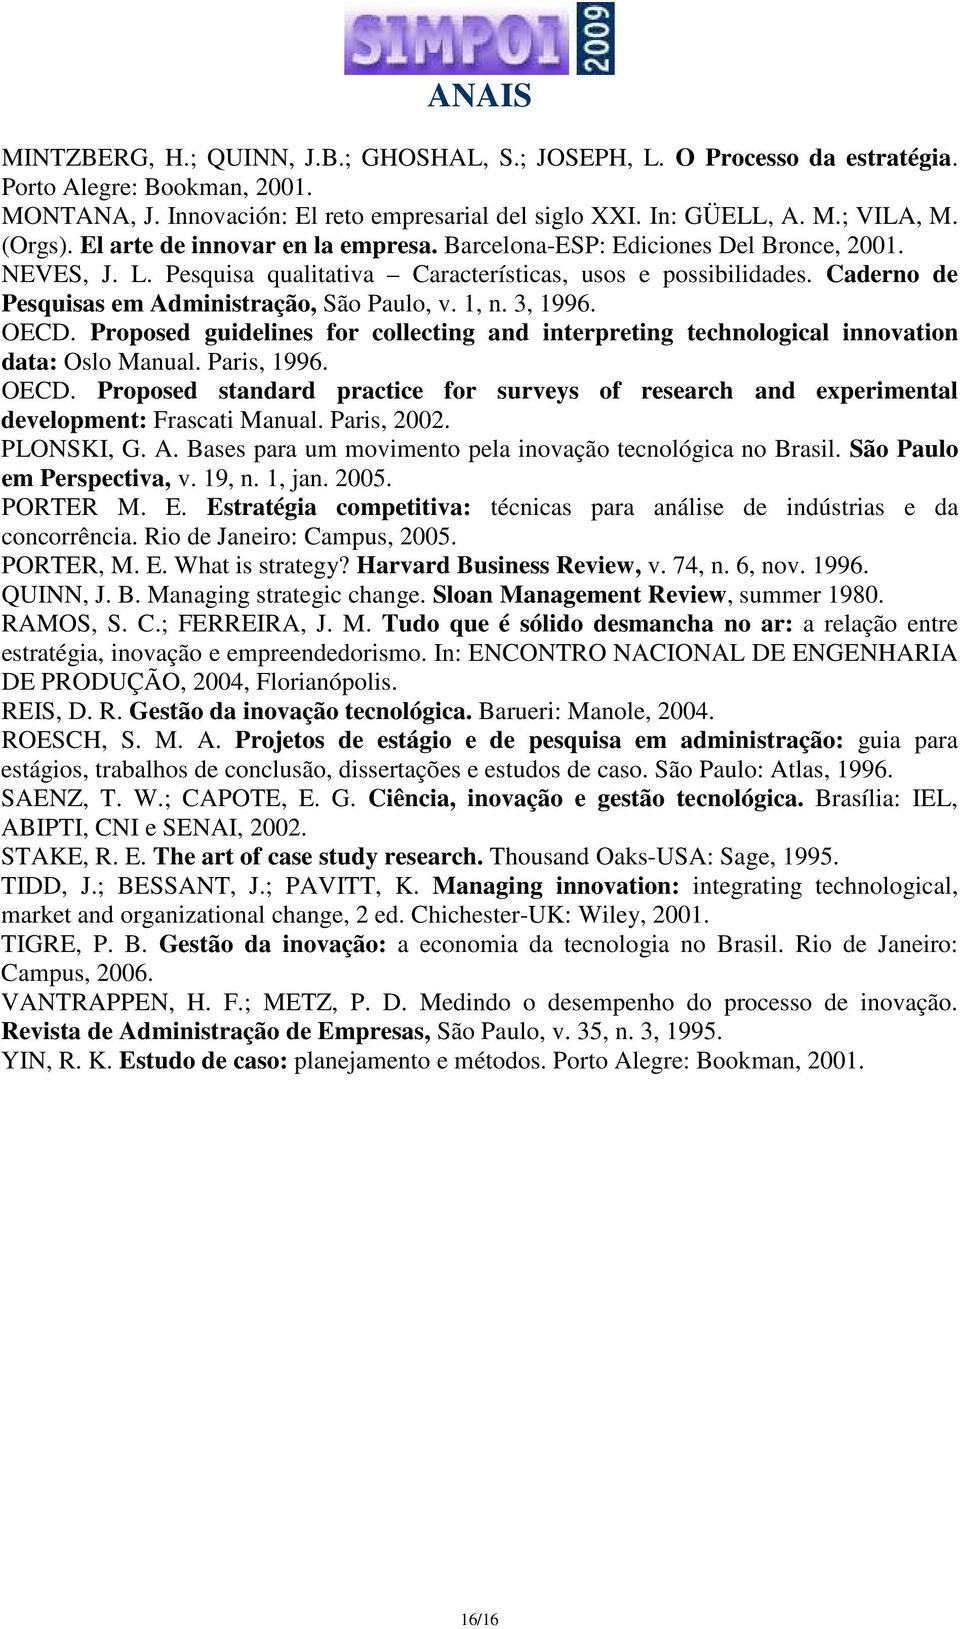 Caderno de Pesquisas em Administração, São Paulo, v. 1, n. 3, 1996. OECD. Proposed guidelines for collecting and interpreting technological innovation data: Oslo Manual. Paris, 1996. OECD. Proposed standard practice for surveys of research and experimental development: Frascati Manual.